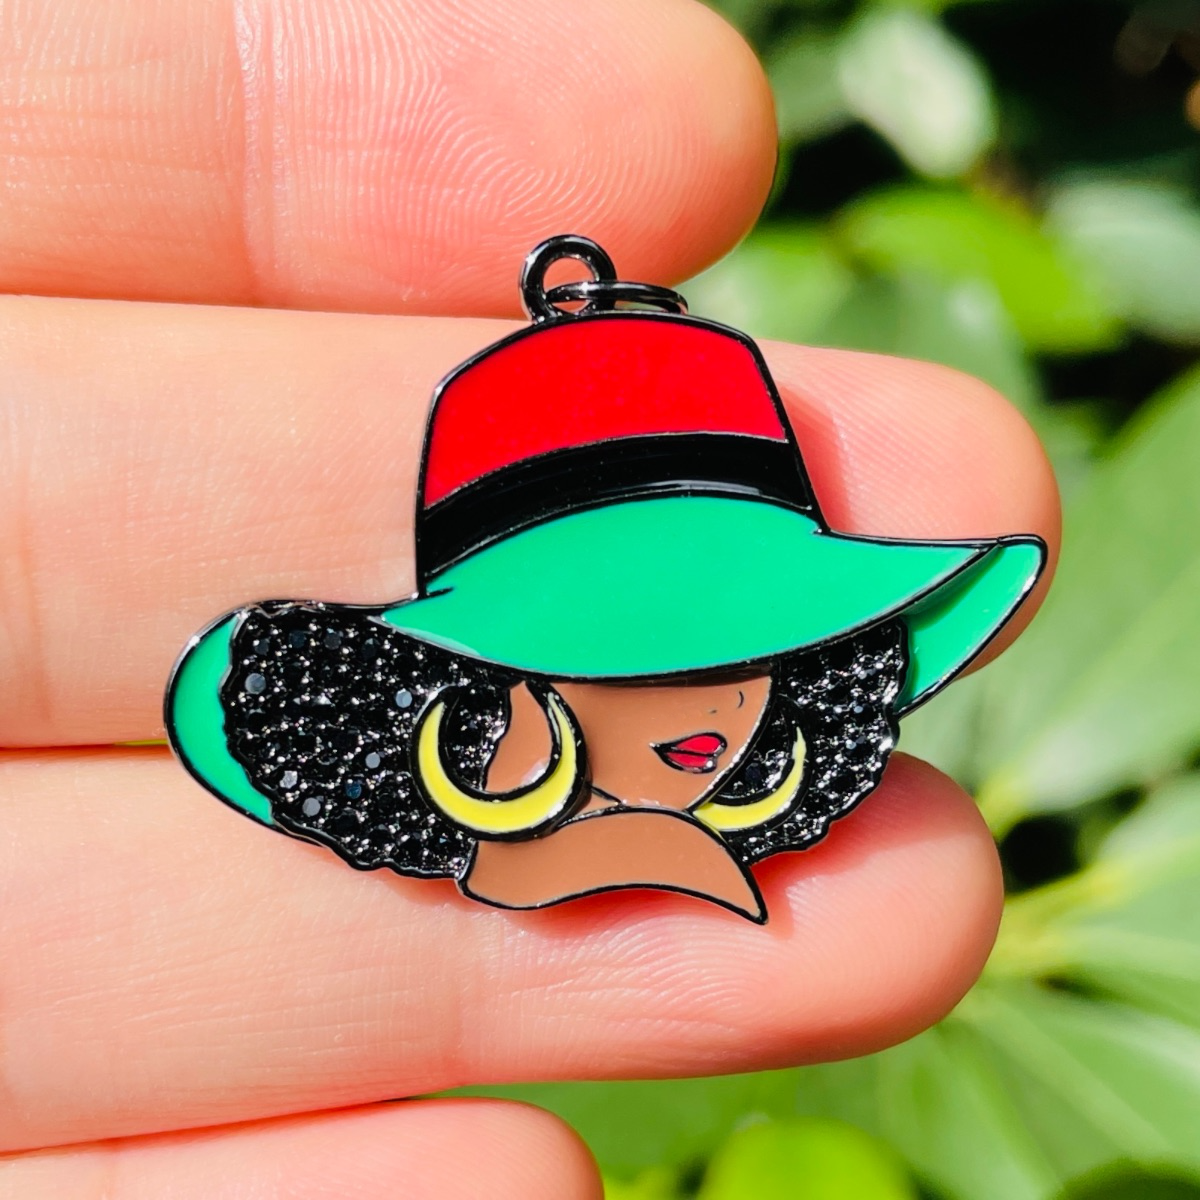 10pcs/lot CZ Paved Red Black Green Hat Afro Black Girl Charms for Juneteenth Awareness Black on Black CZ Paved Charms Afro Girl/Queen Charms Juneteenth & Black History Month Awareness New Charms Arrivals Charms Beads Beyond